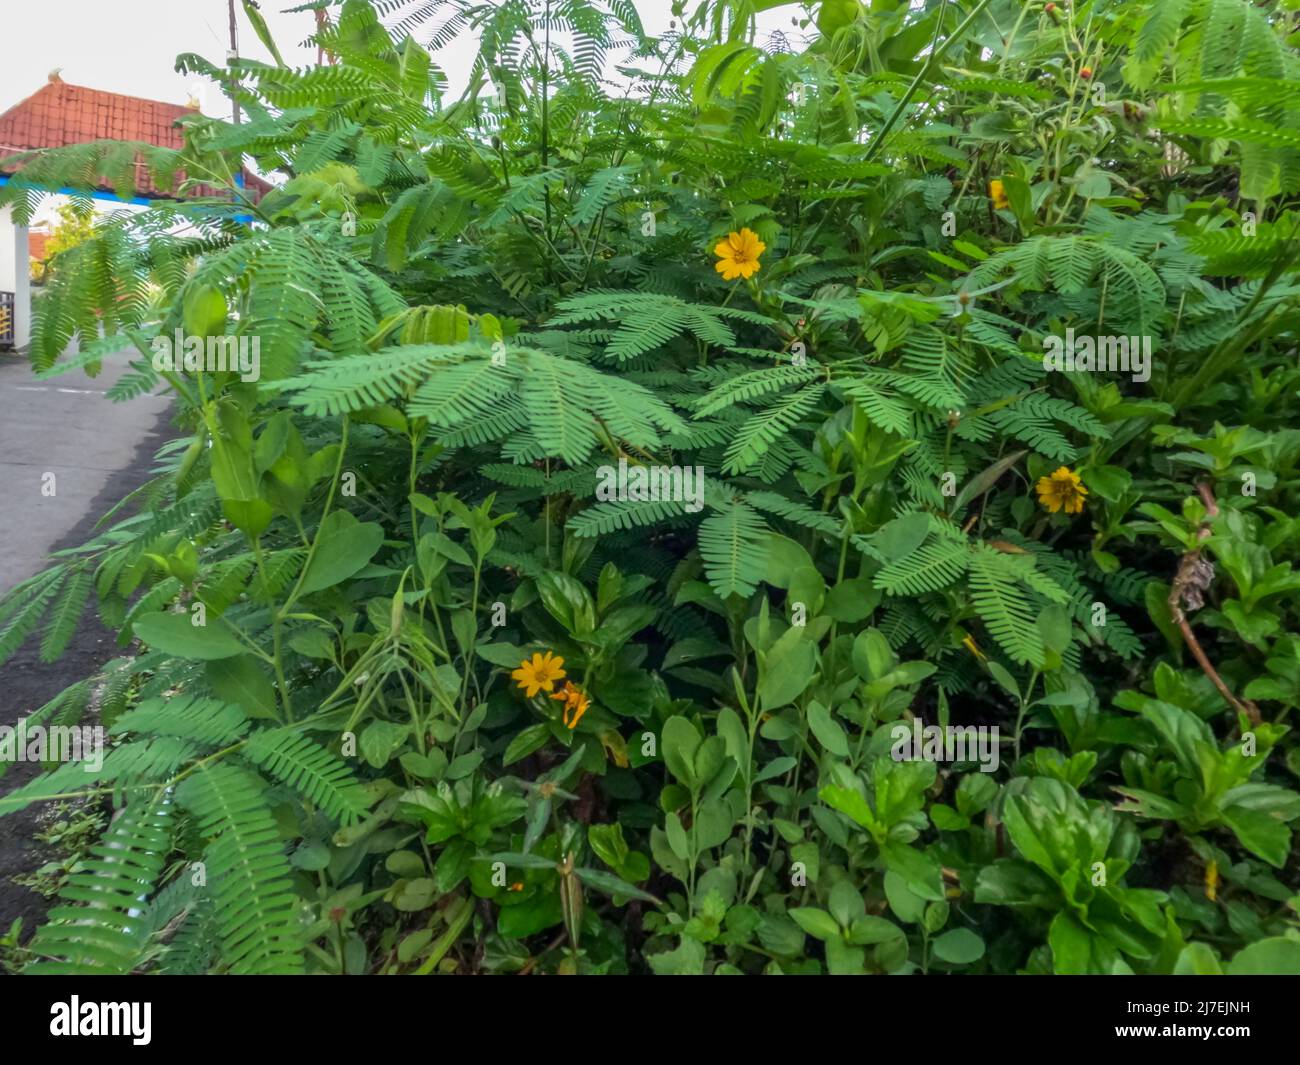 A type of leguminous plant that grows wild on the side of the road, is allowed to grow to decorate the streets in the village, so that it becomes beau Stock Photo